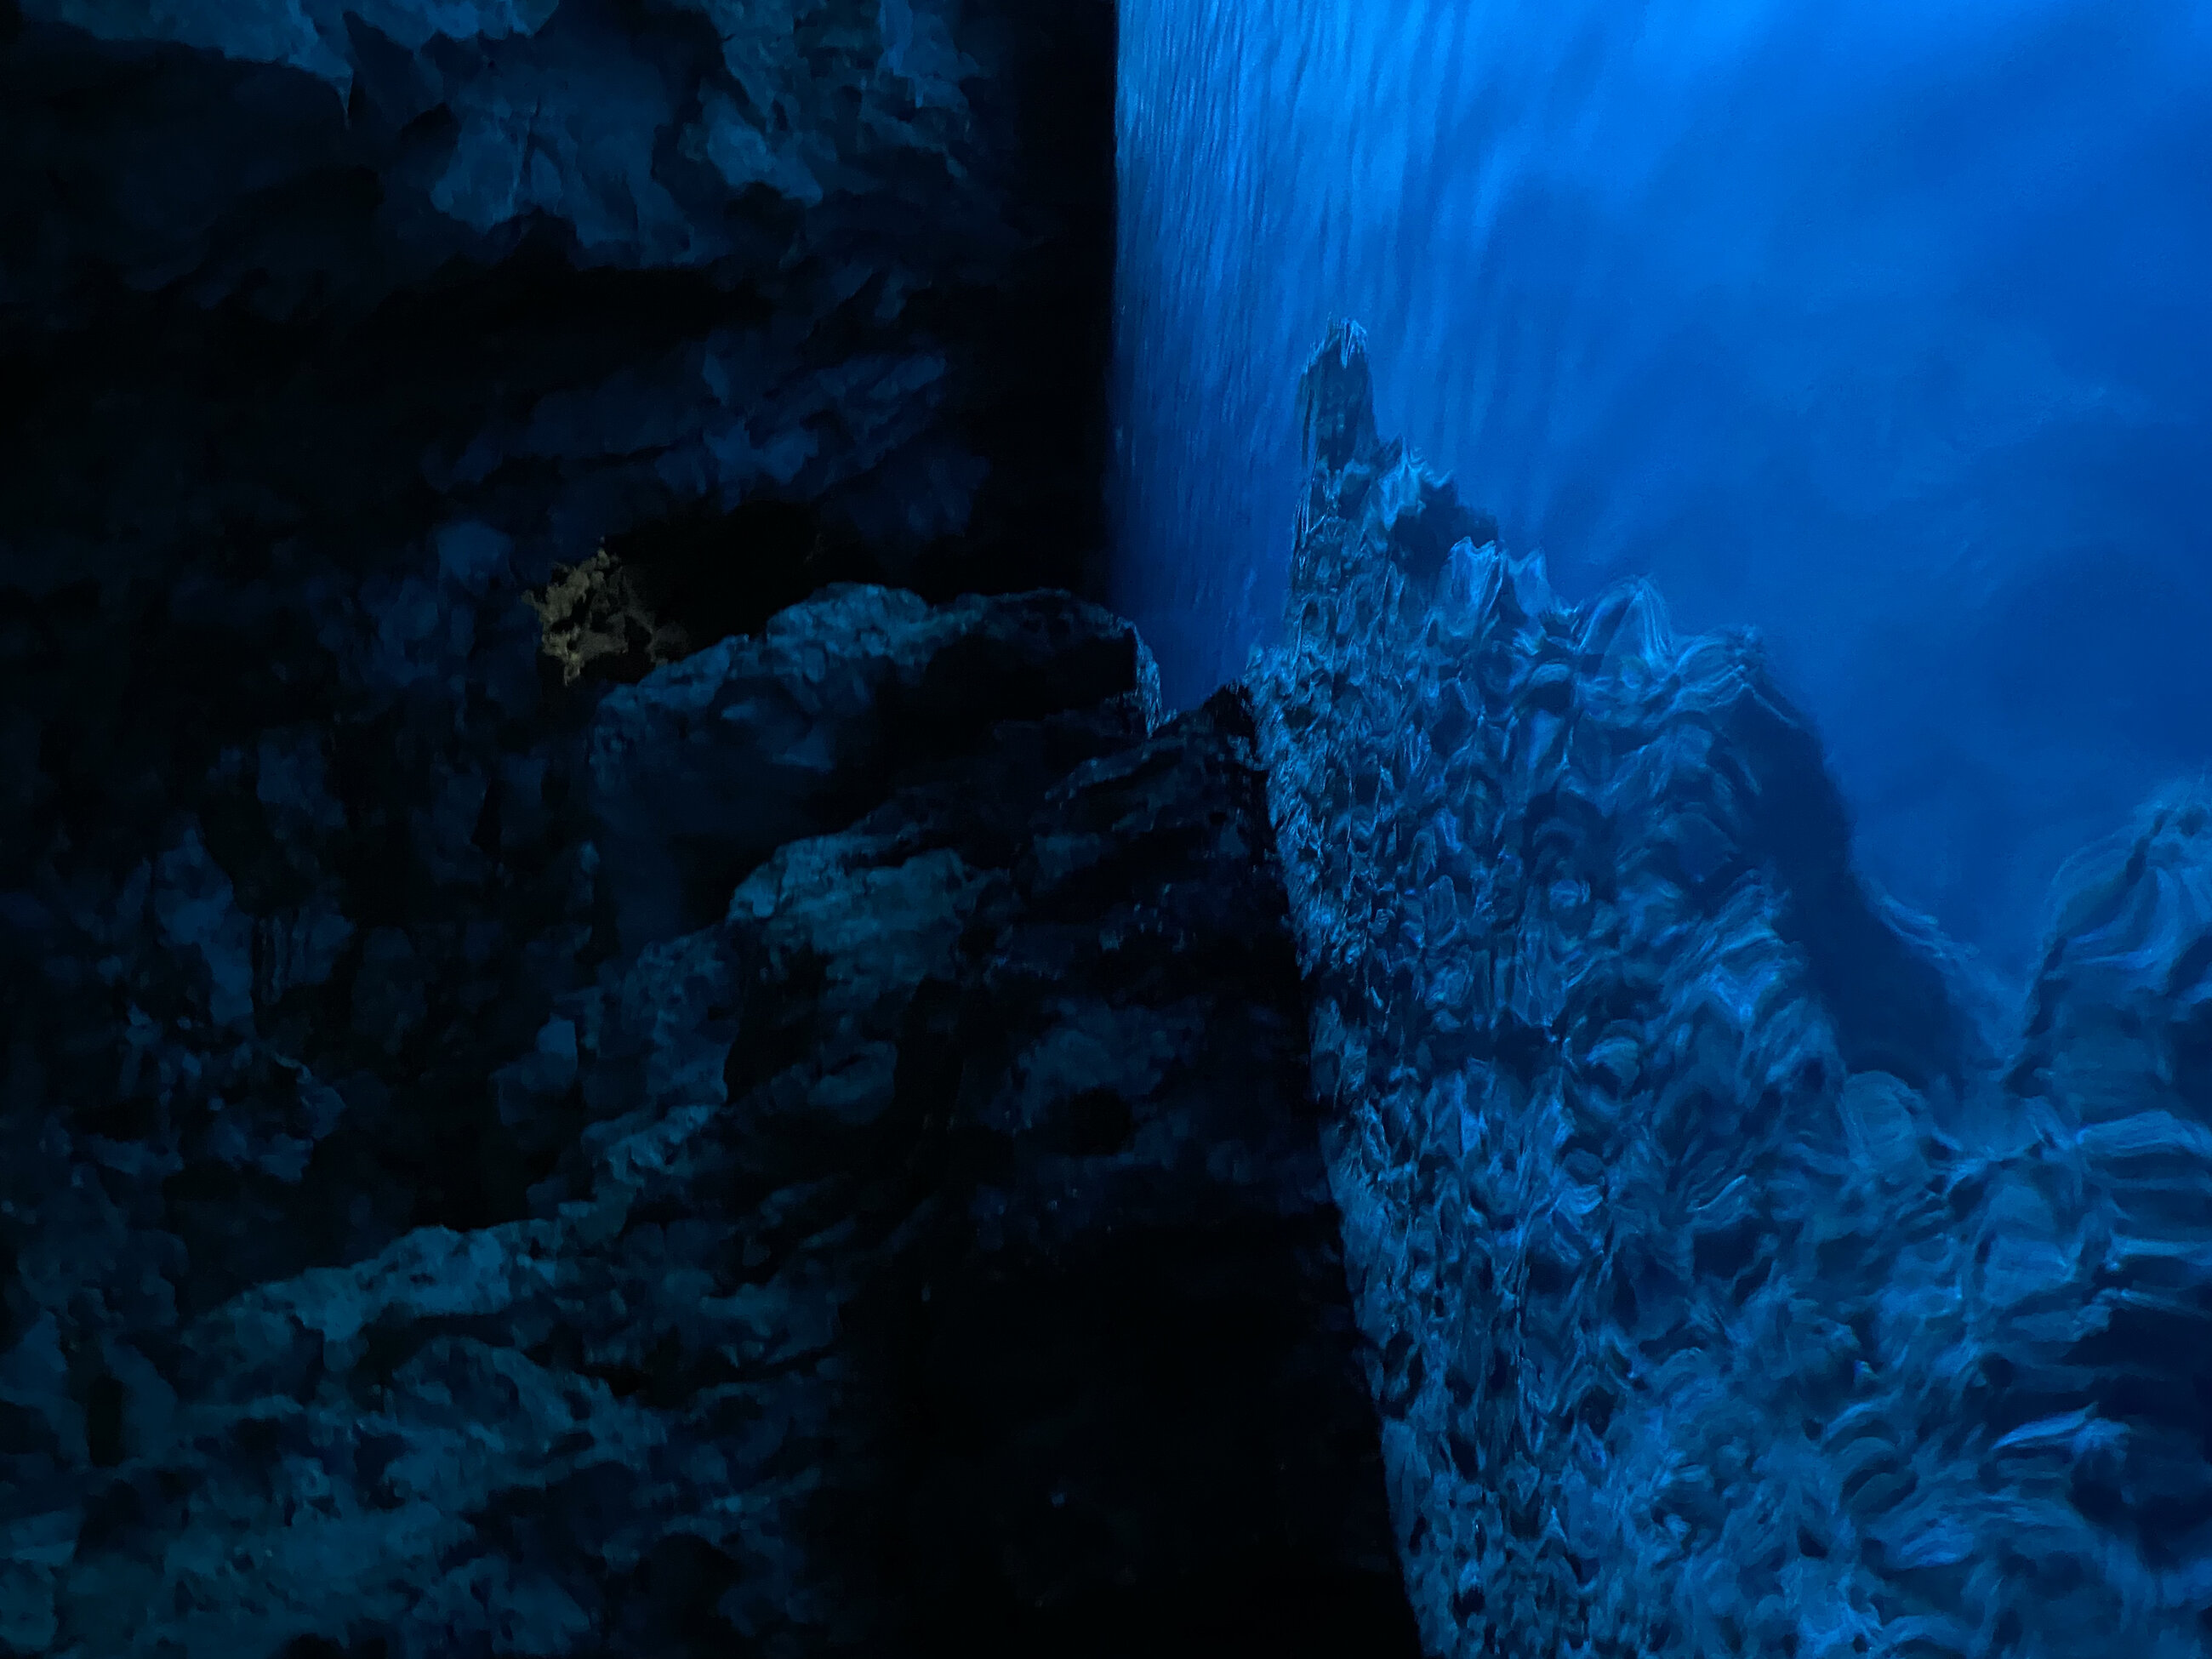 The breathtaking blue cave